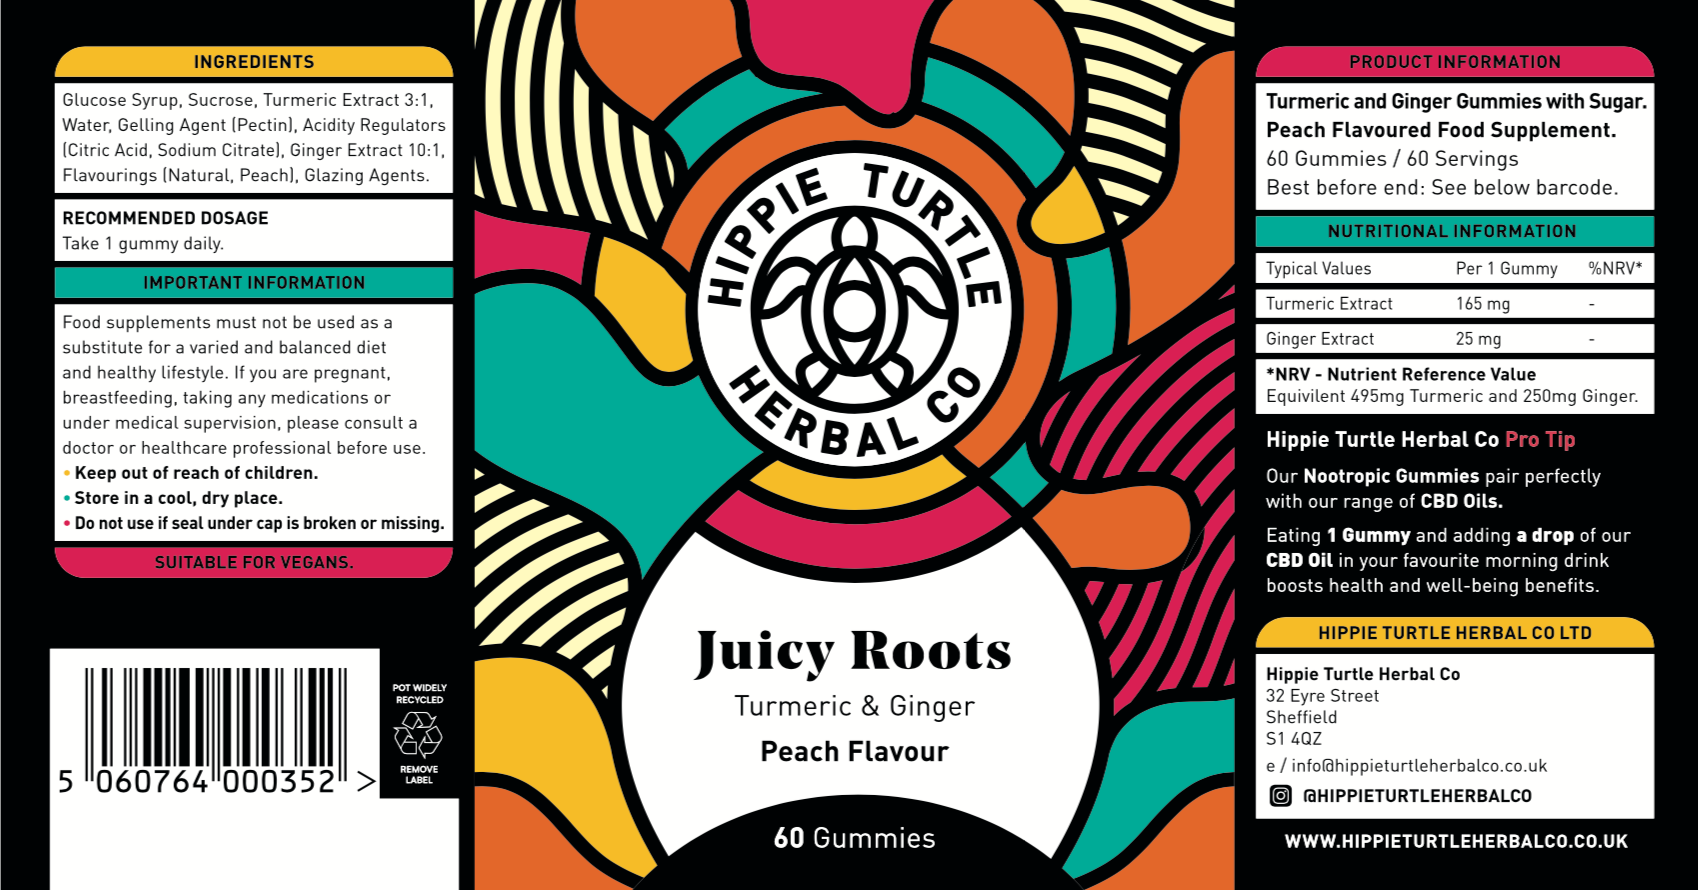 Hippie Turtle Herbal Co Juicy Roots high quality tur,eric and ginger supplement gummies